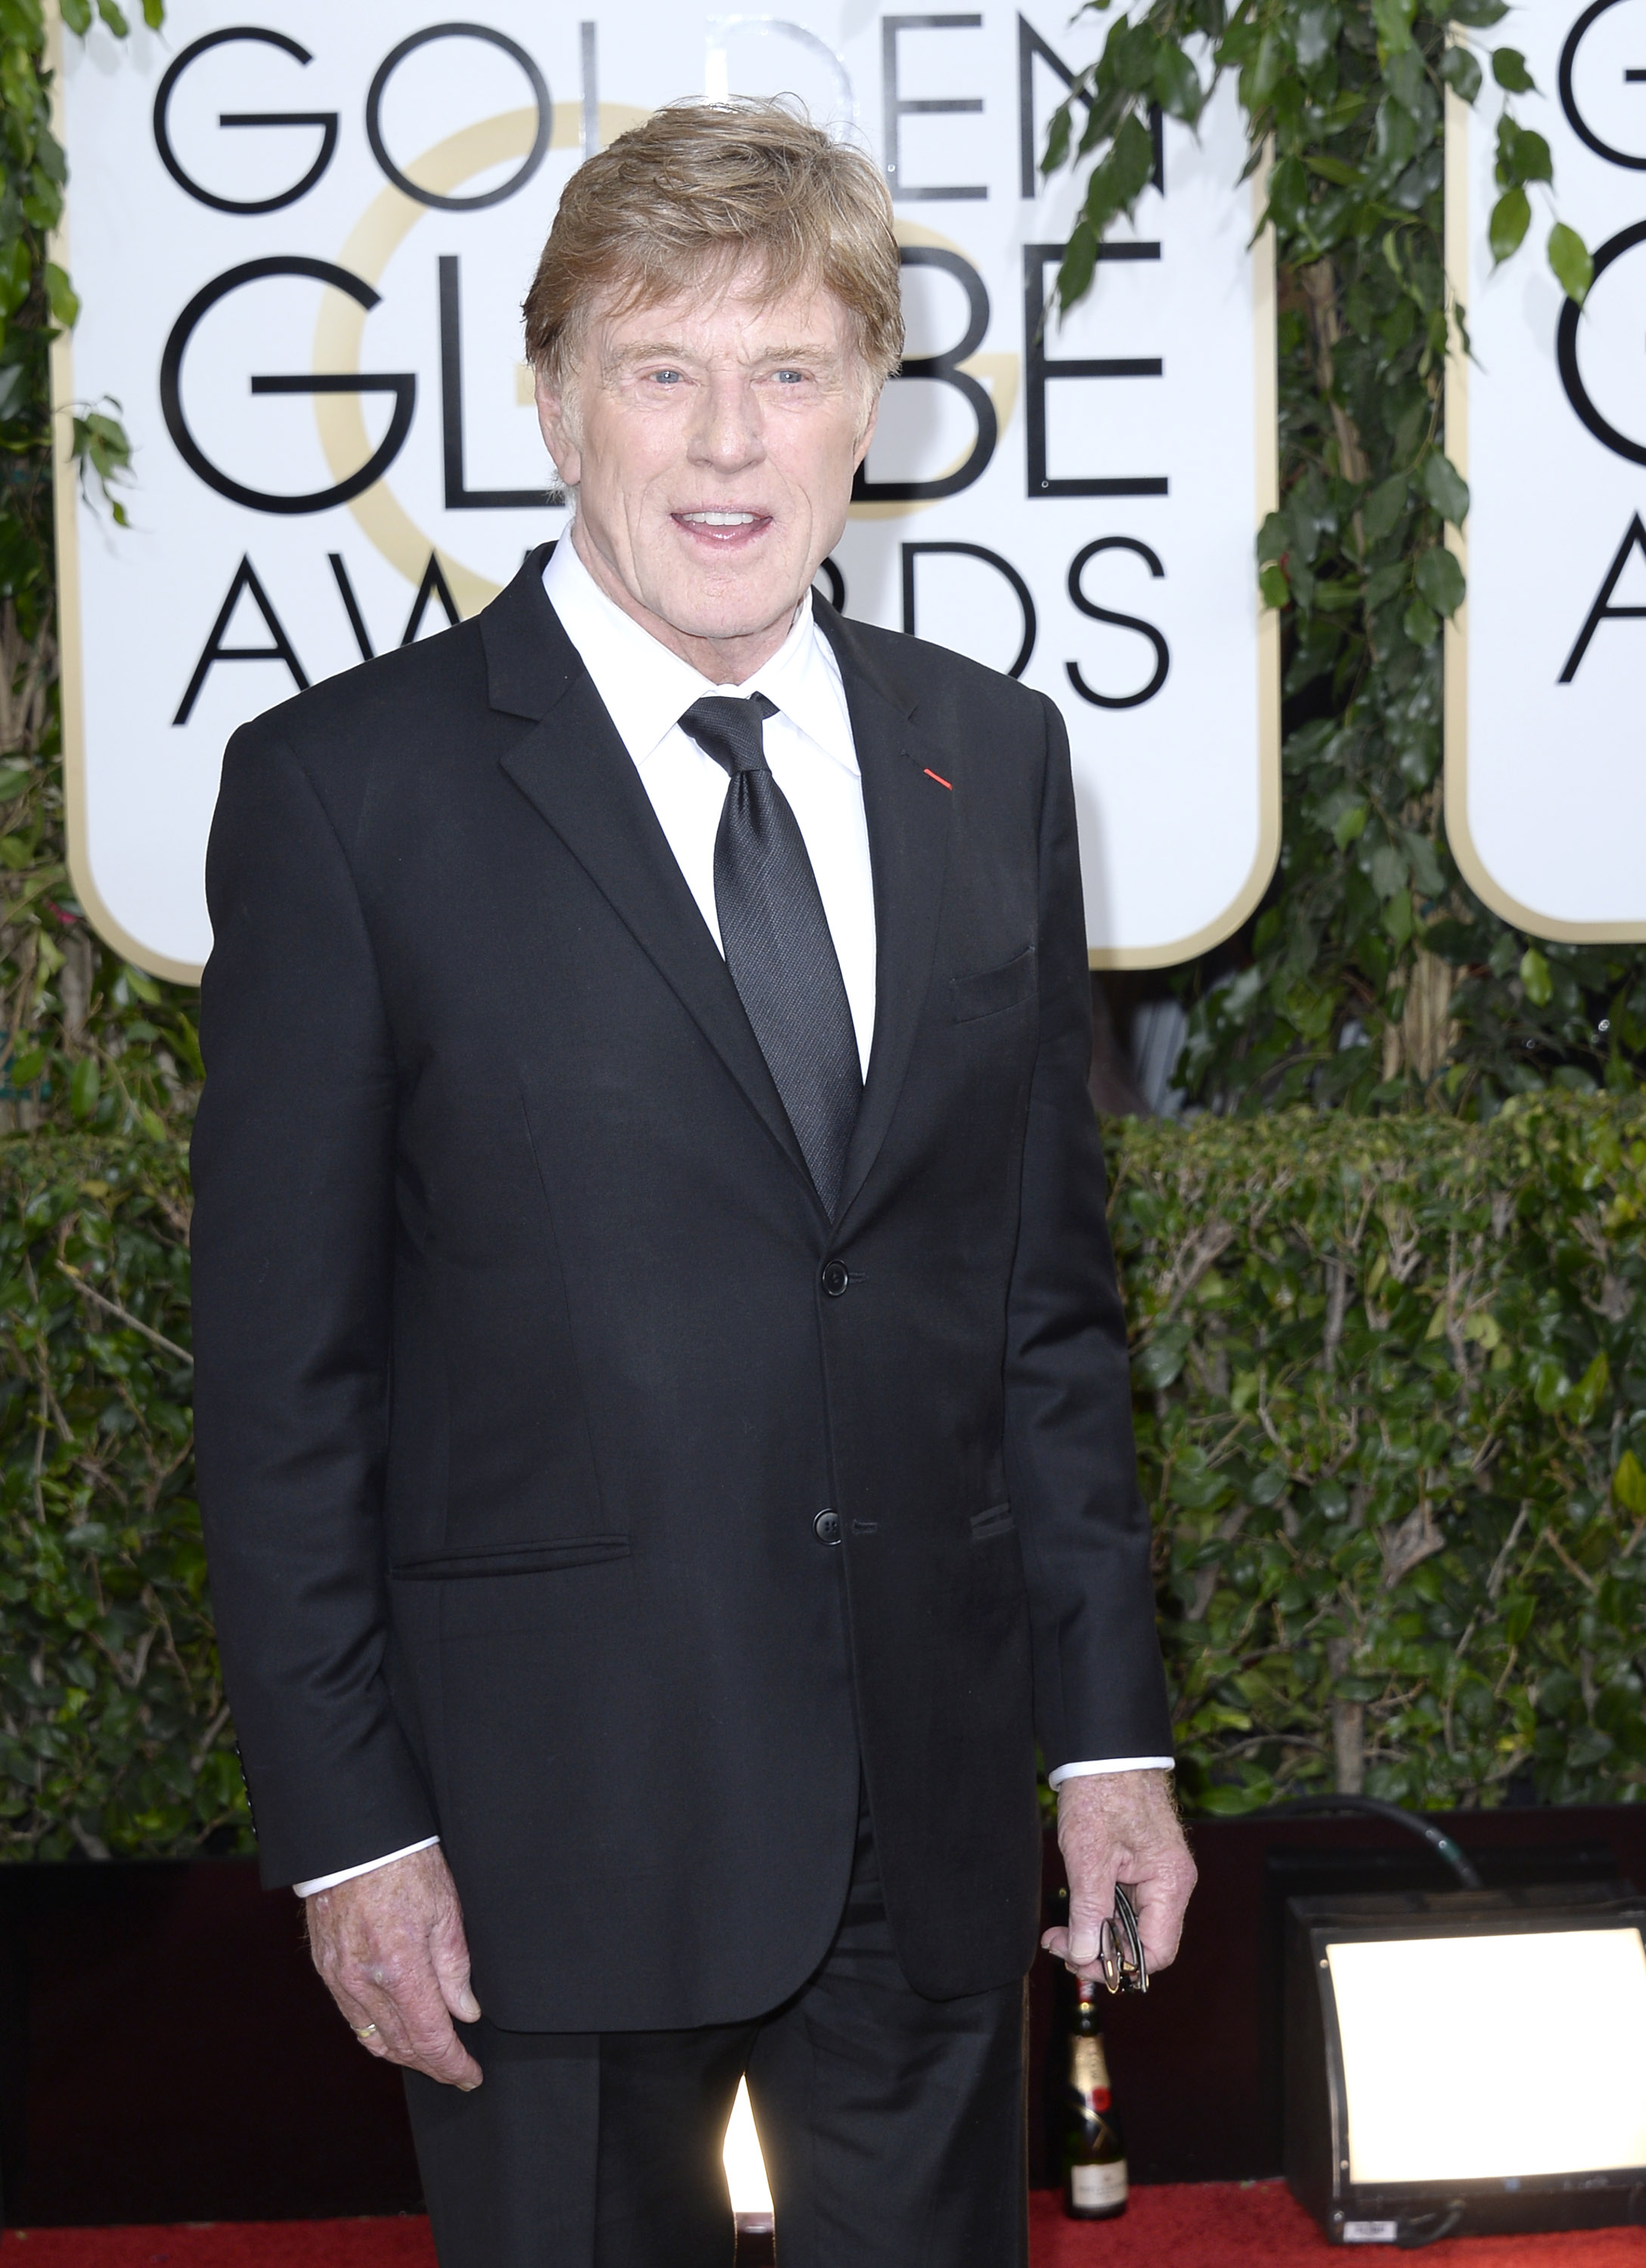 Robert Redford arrives at the 71st Annual Golden Globe Awards held at the Beverly Hilton Hotel on January 12, 2014. | Source: Getty Images